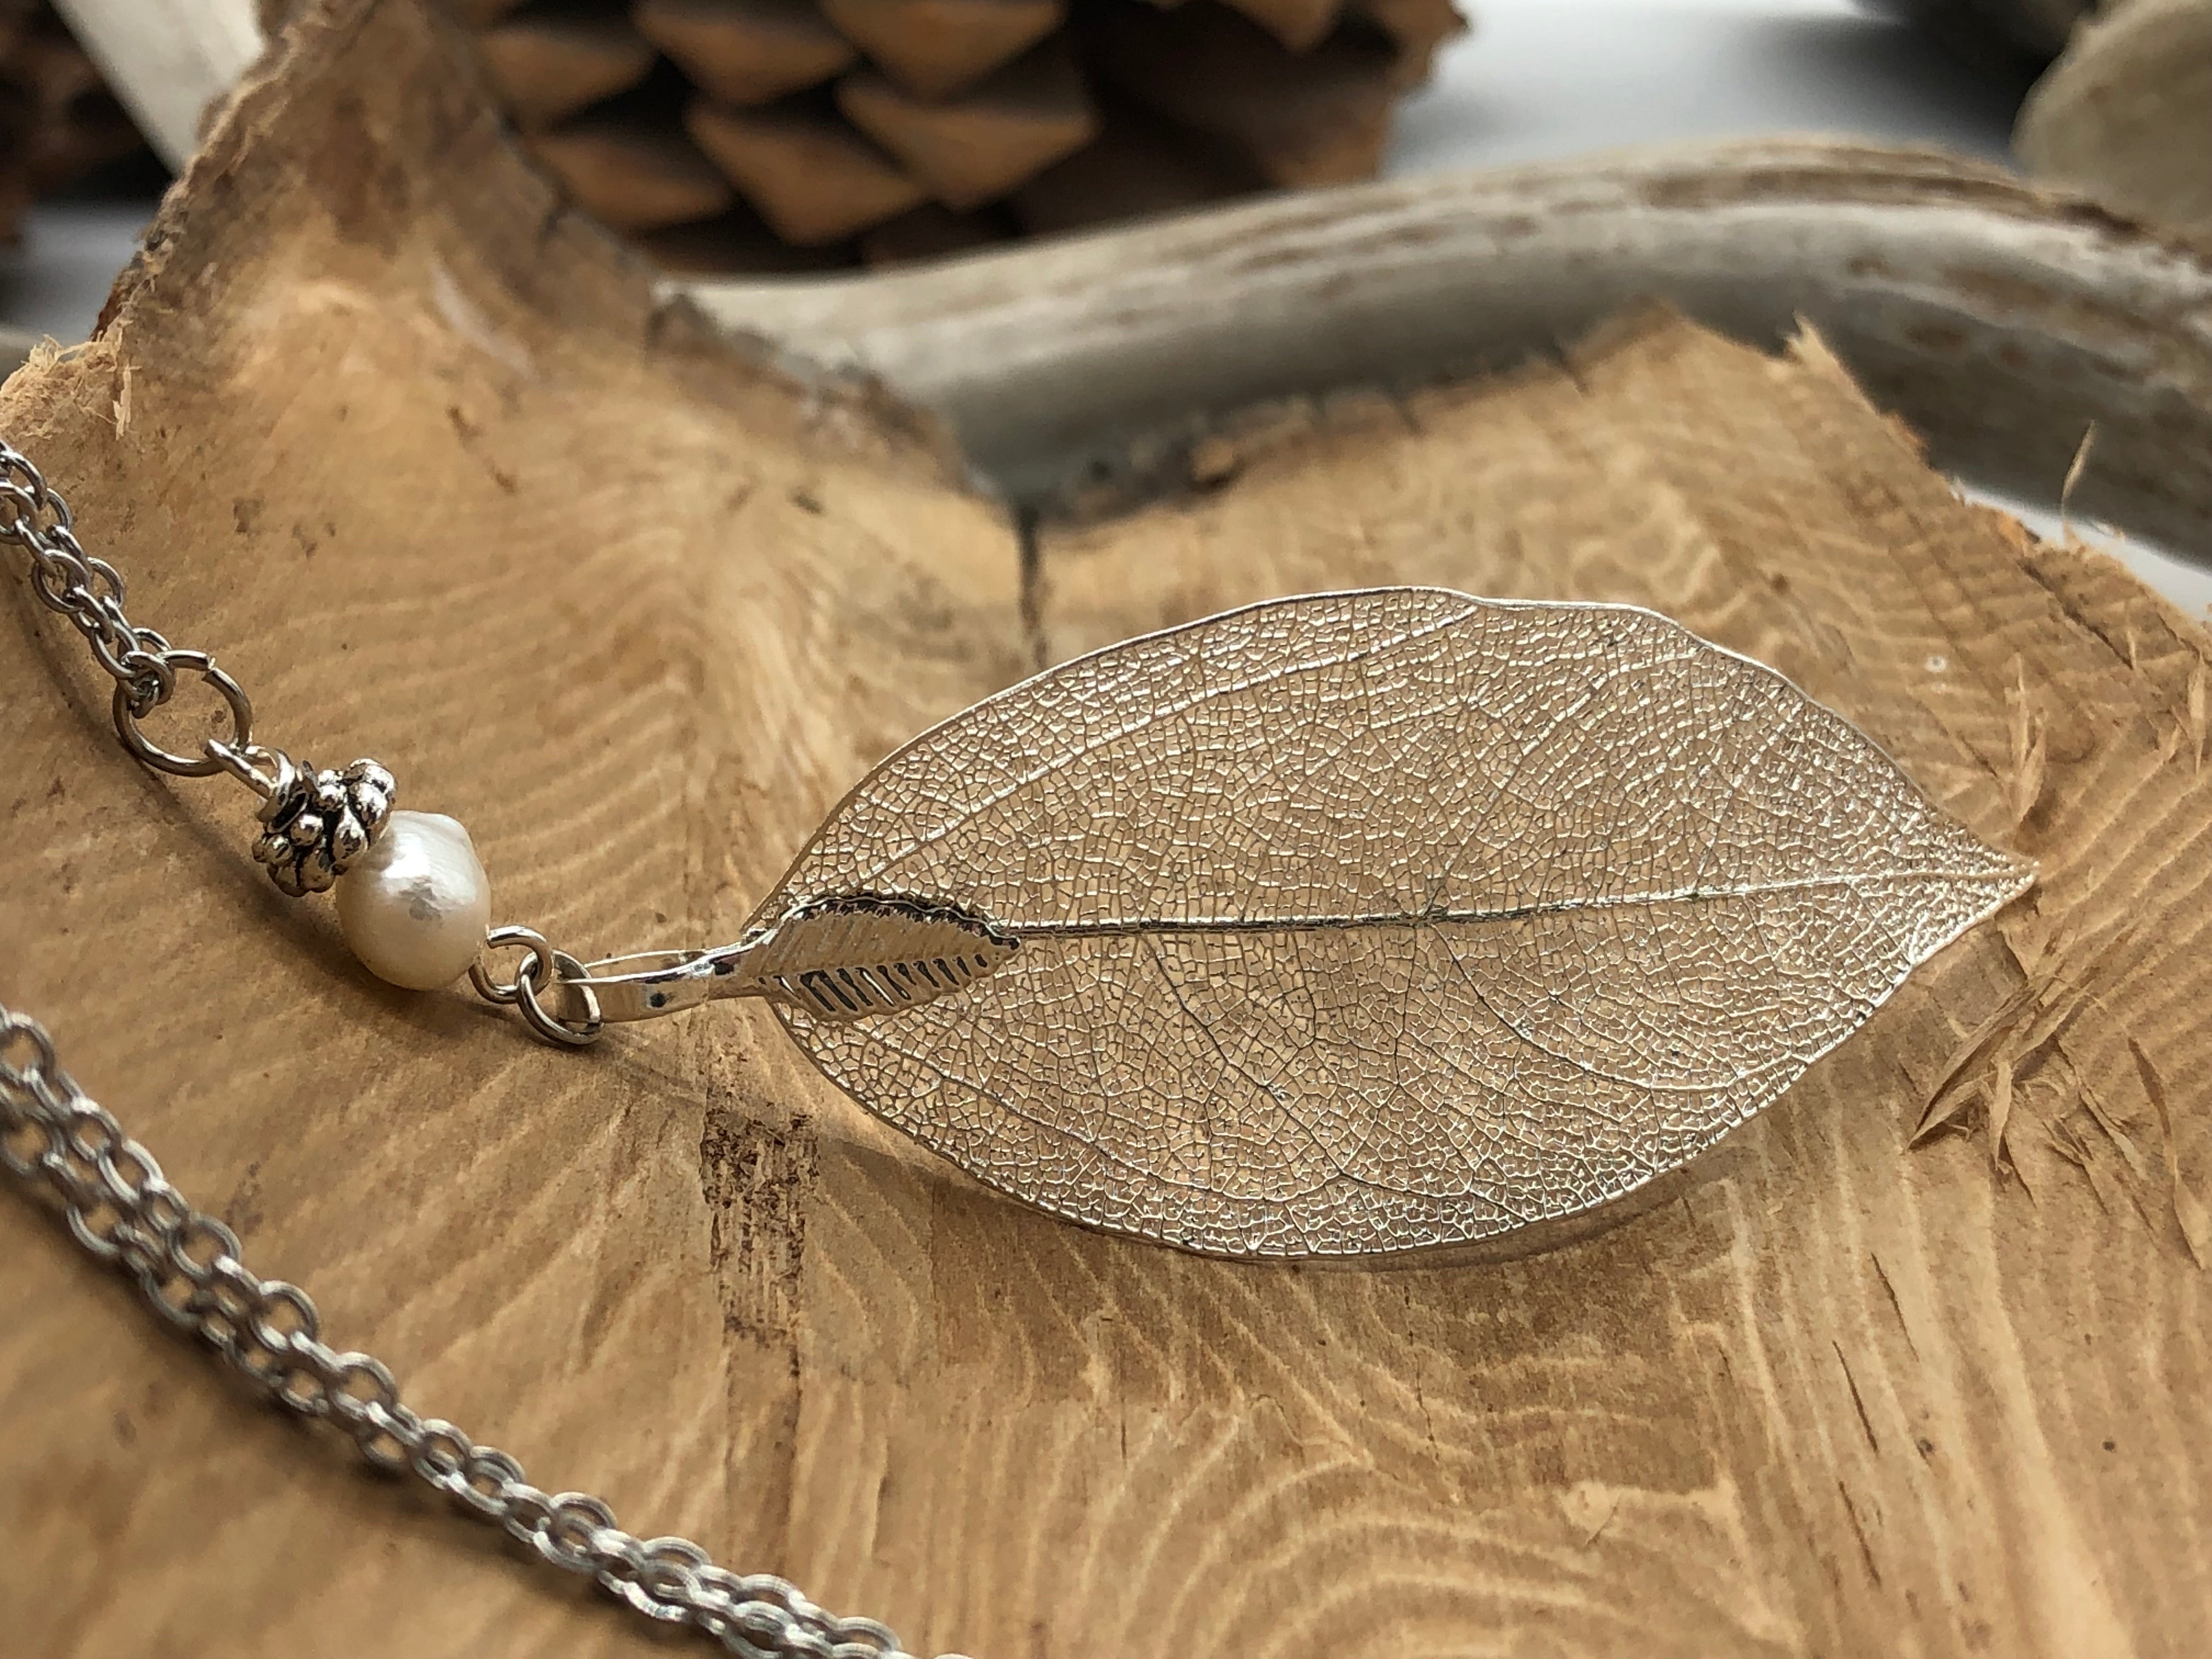 Long leaf necklace made with a real electroplated leaf. Available in Gold, Silver and Rose gold.